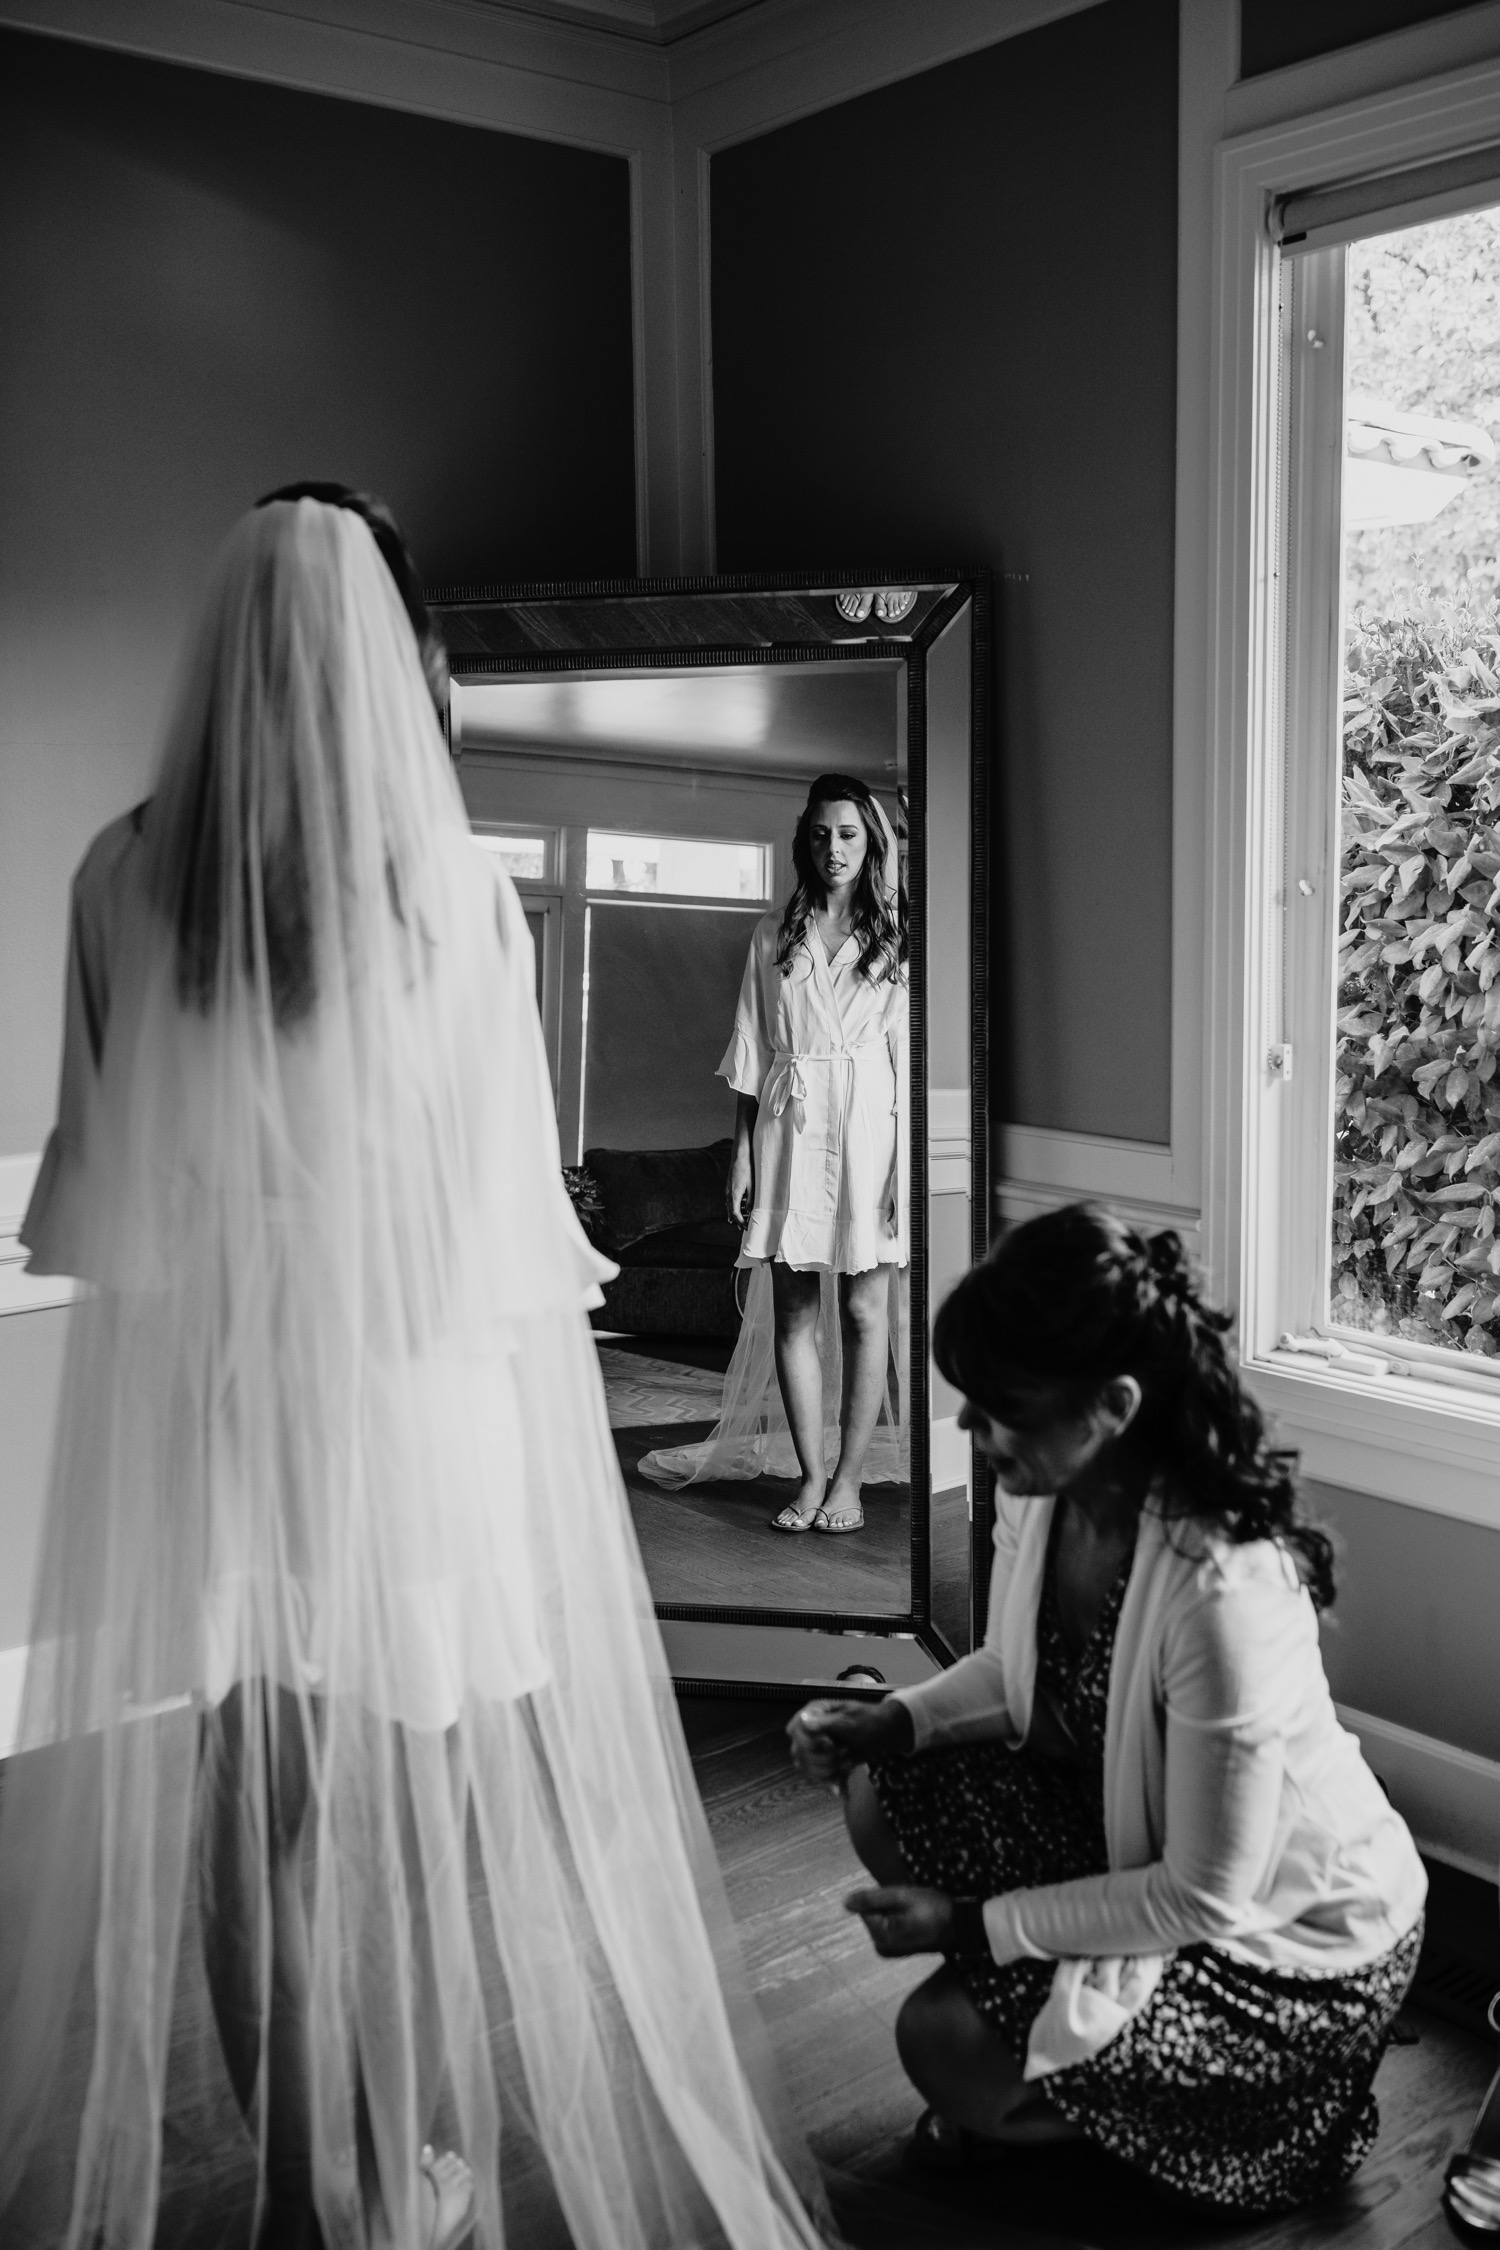 Bride standing in her veil and robe looking in the mirror as she gets ready for her wedding at the Maples in Woodland, CA.